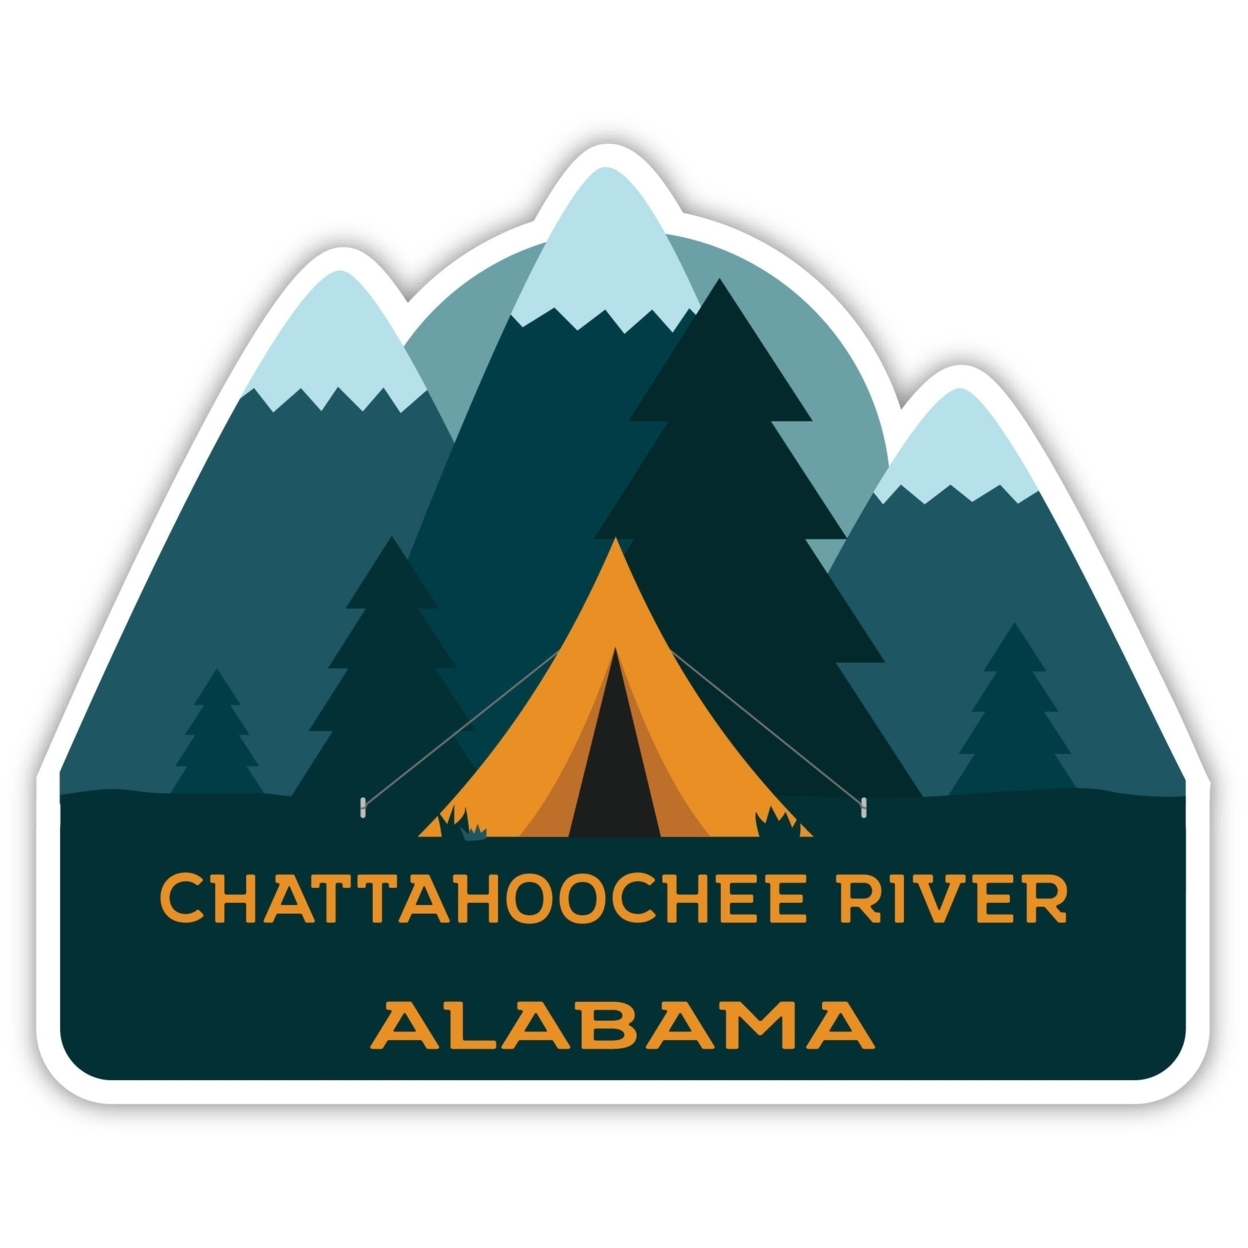 Chattahoochee River Alabama Souvenir Decorative Stickers (Choose Theme And Size) - 4-Pack, 10-Inch, Tent